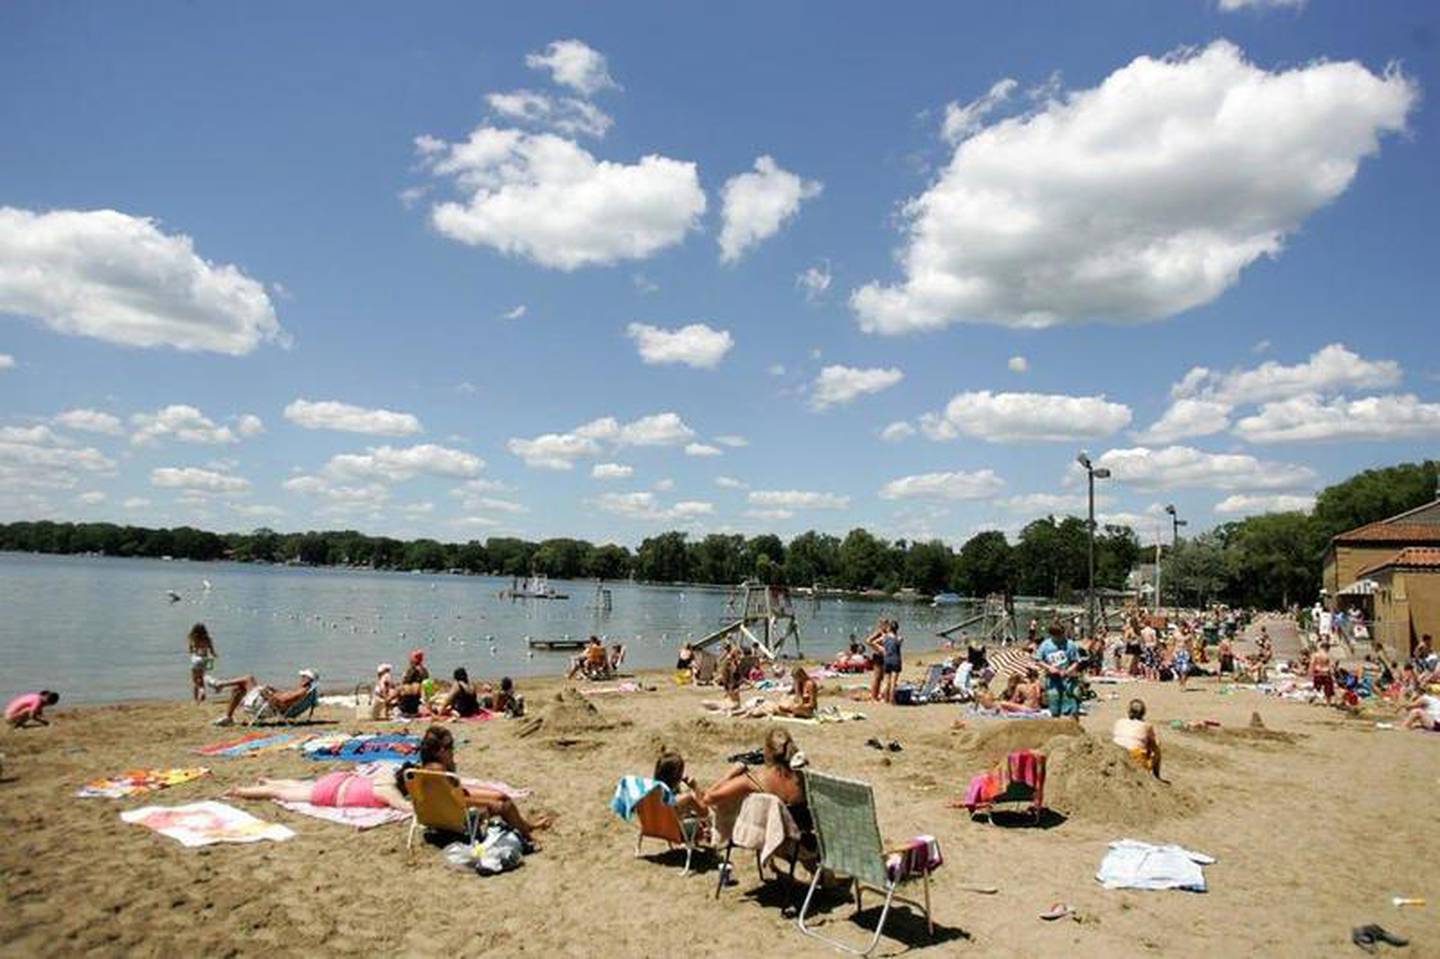 Crystal Lake Main and West beaches open for the season at 9 a.m. May 26.